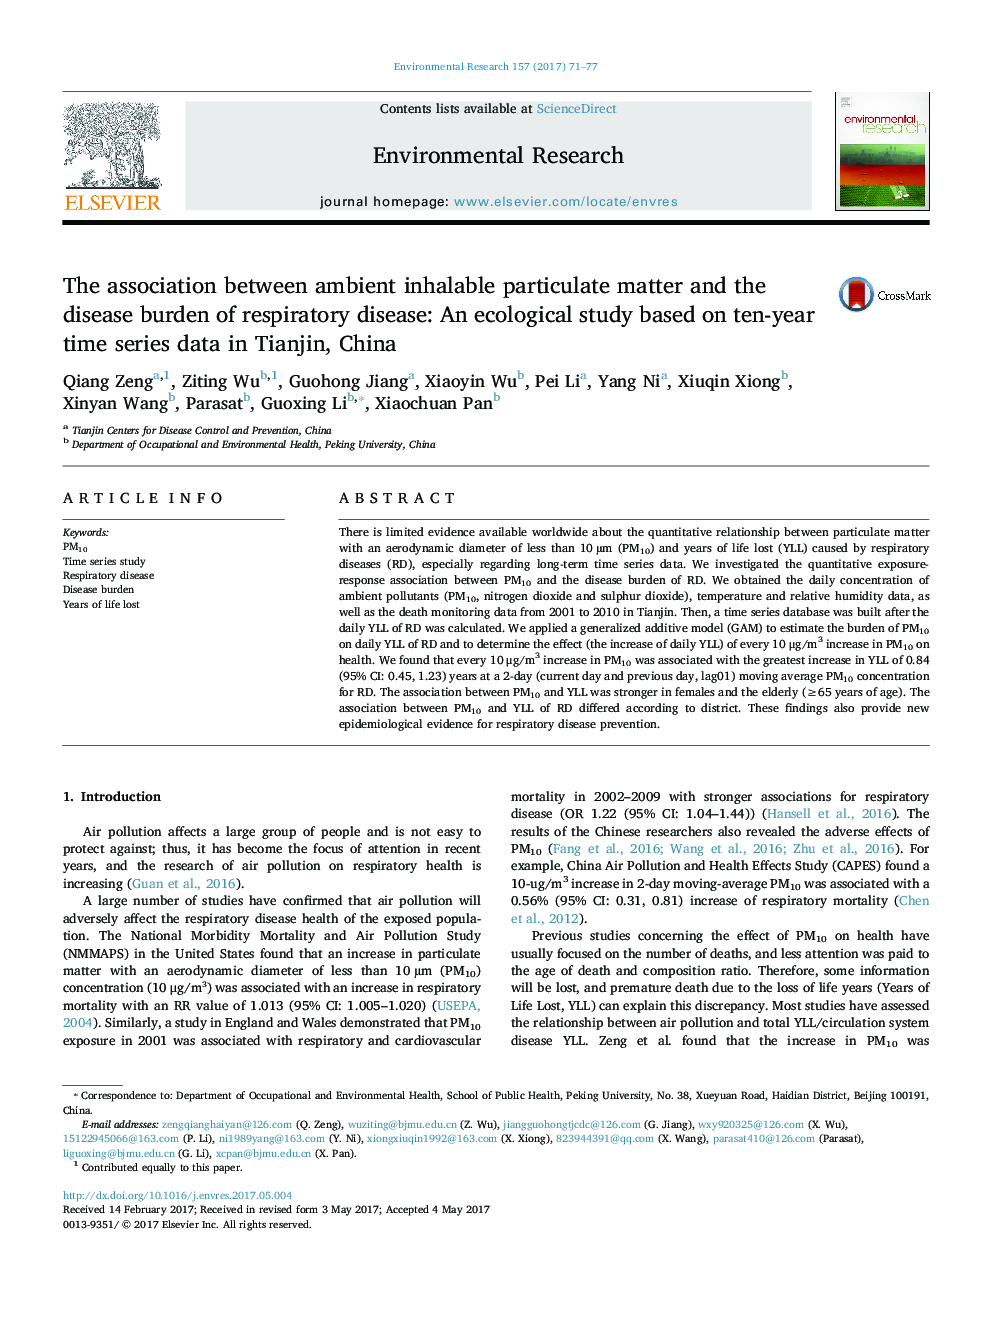 The association between ambient inhalable particulate matter and the disease burden of respiratory disease: An ecological study based on ten-year time series data in Tianjin, China